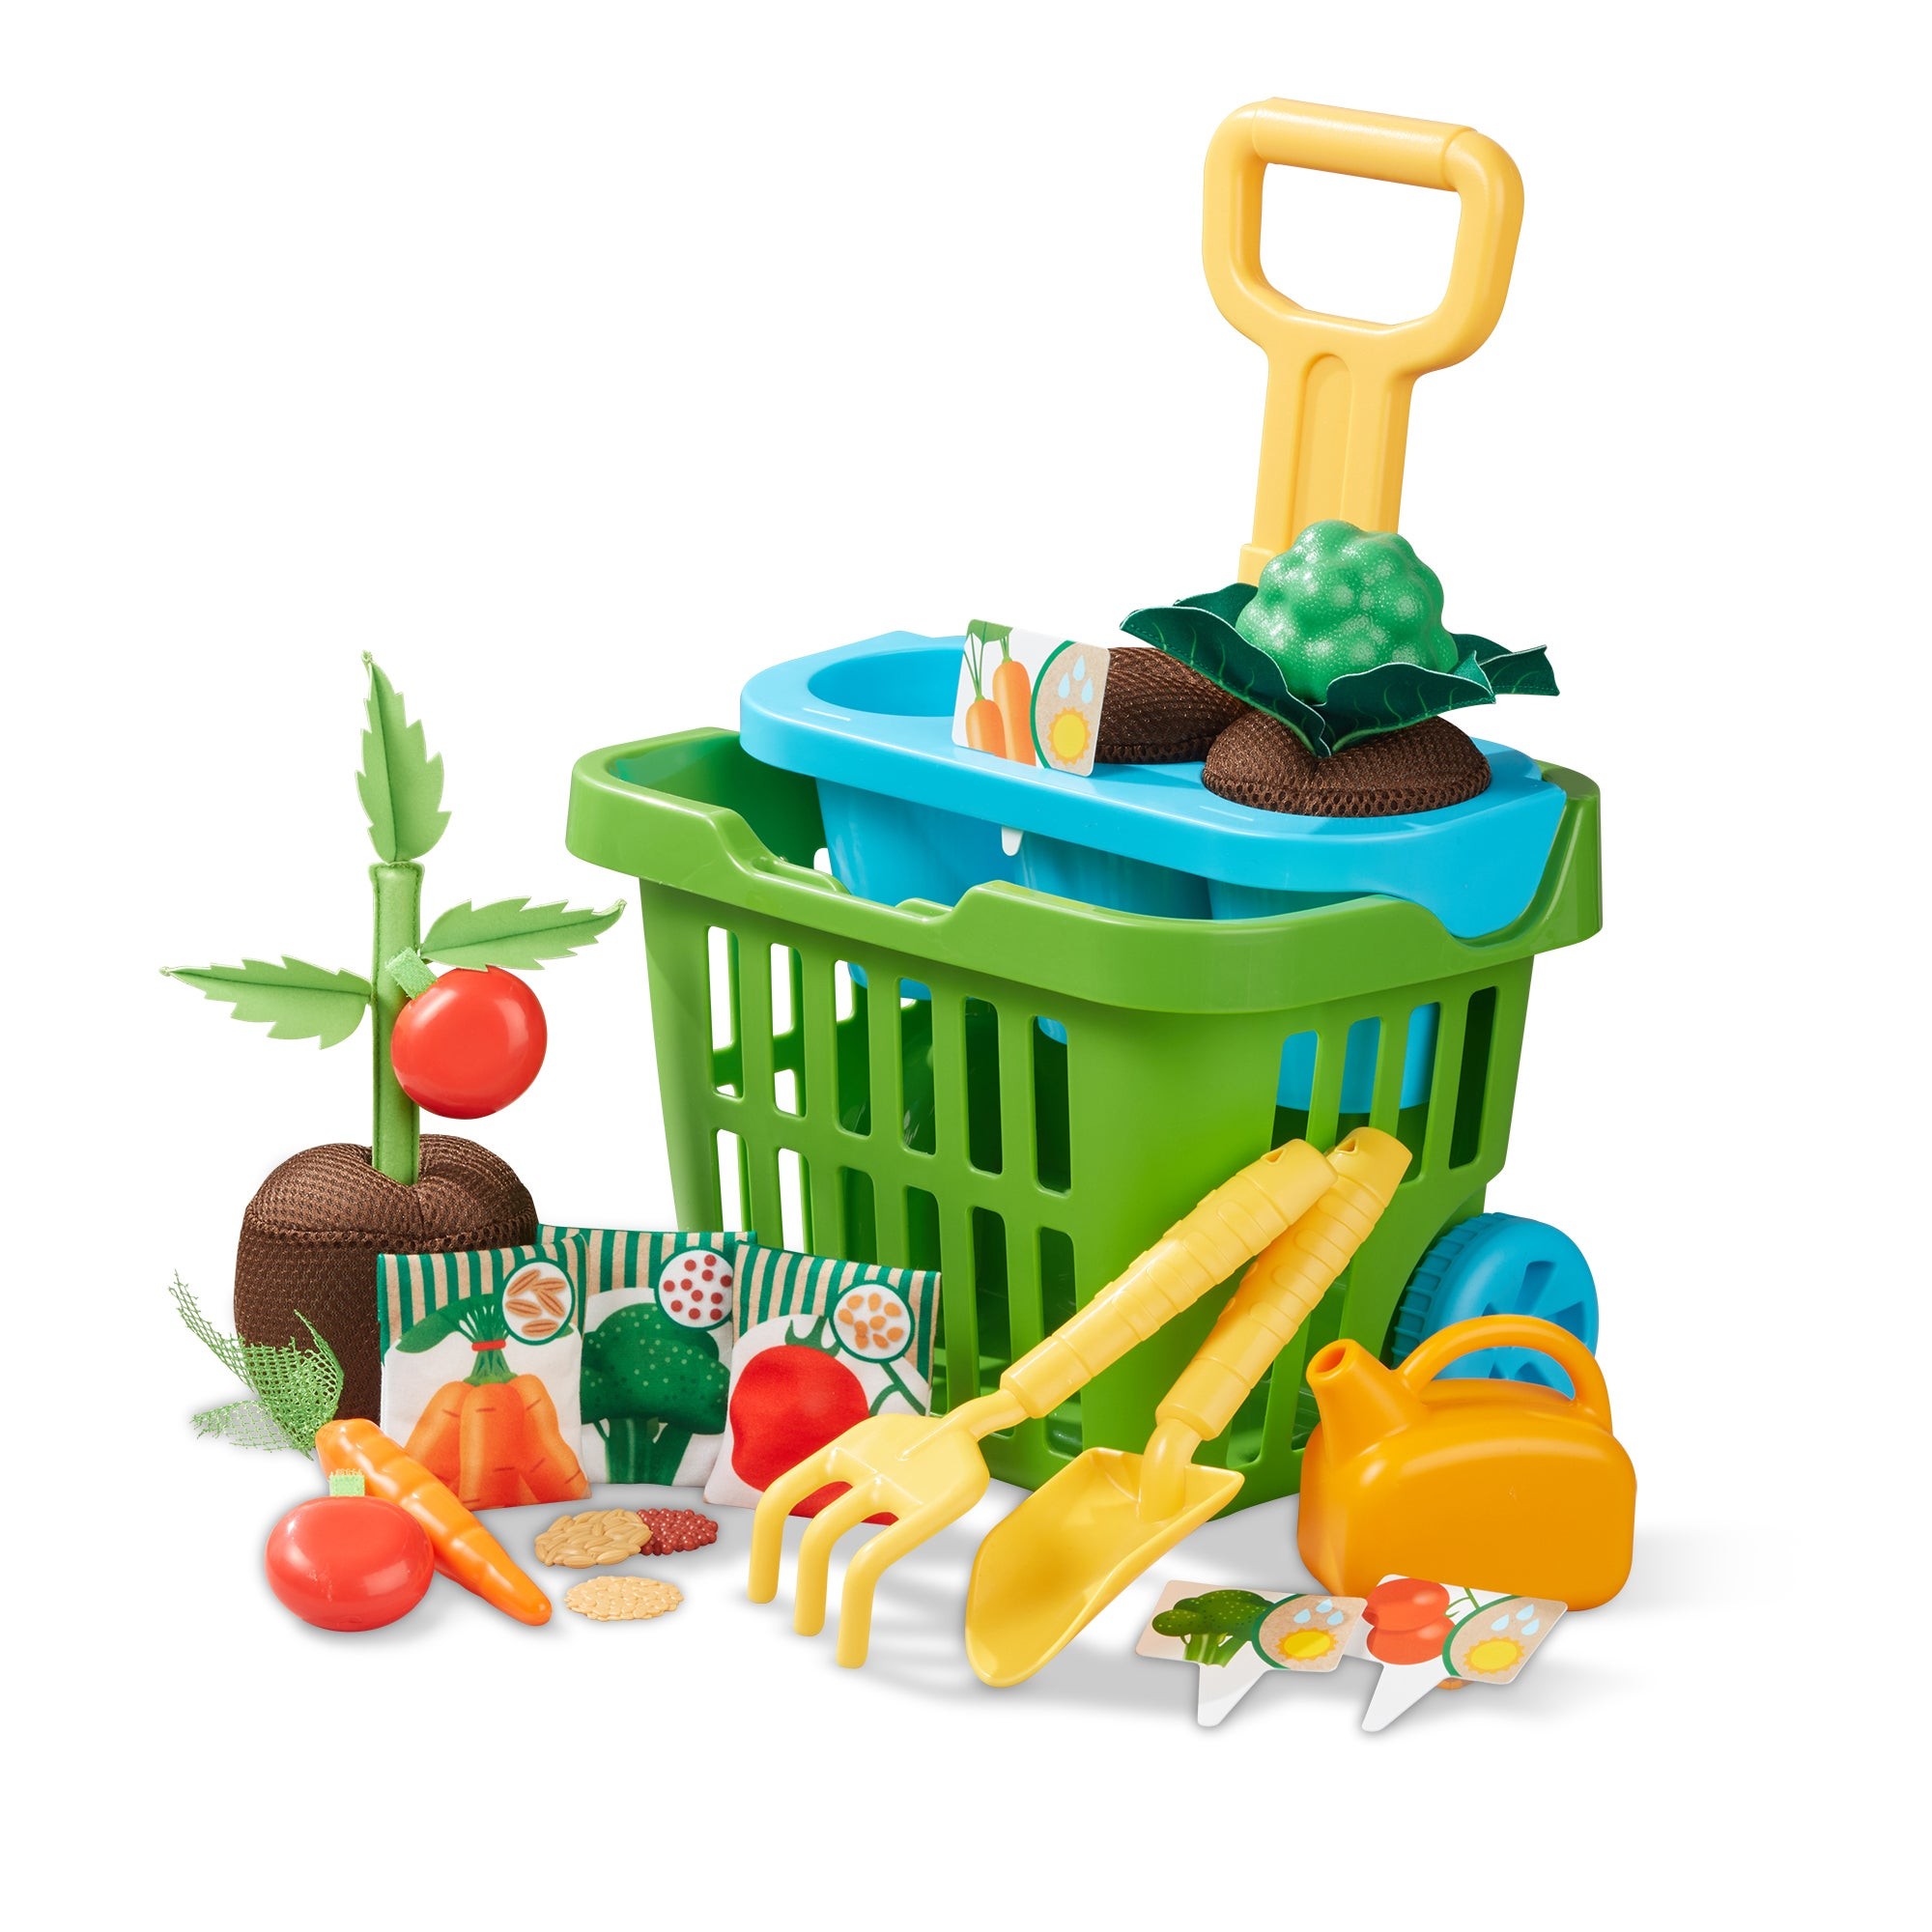 Let's Explore Vegetable Gardening Playset, Ages 3+ Years